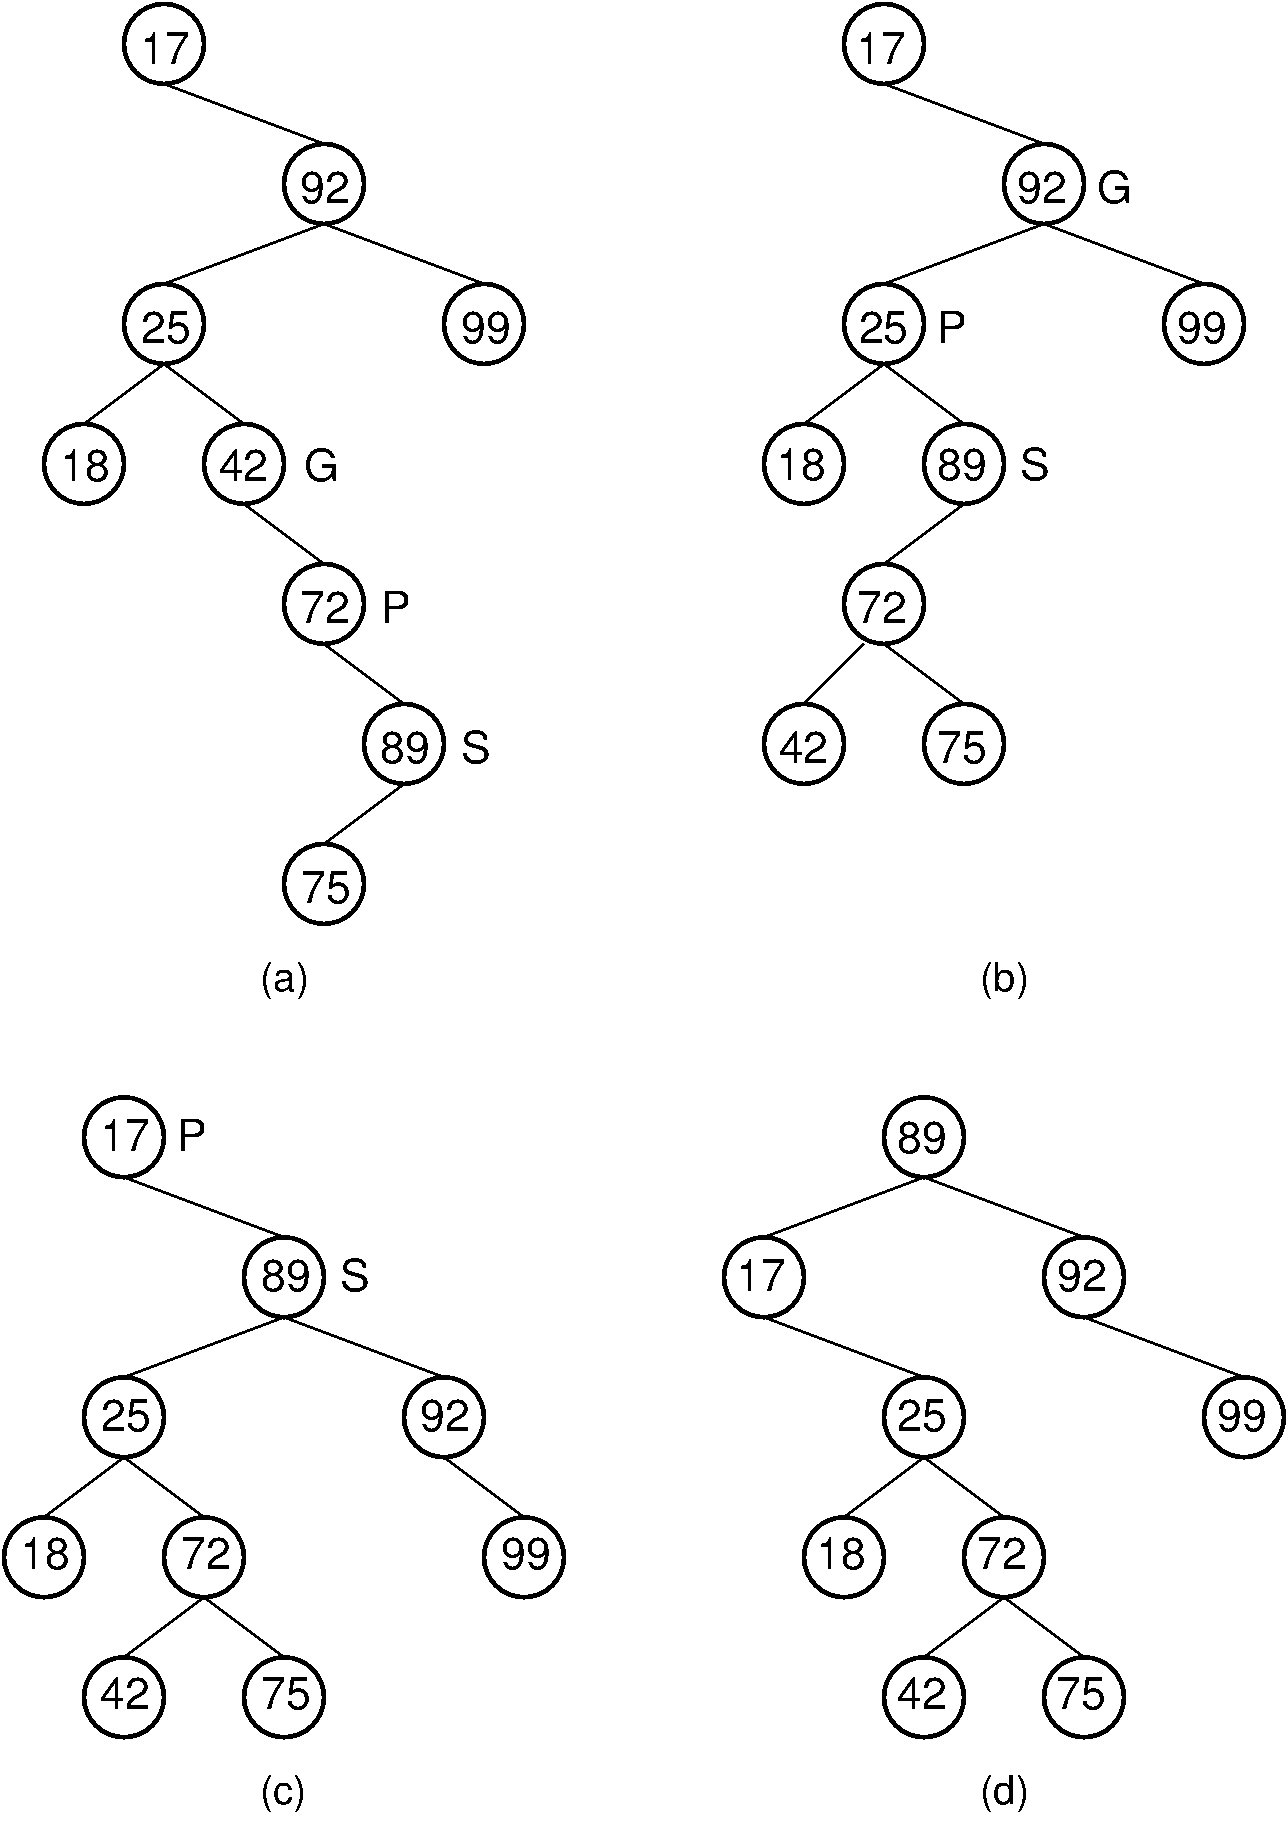 Example of search in a splay tree